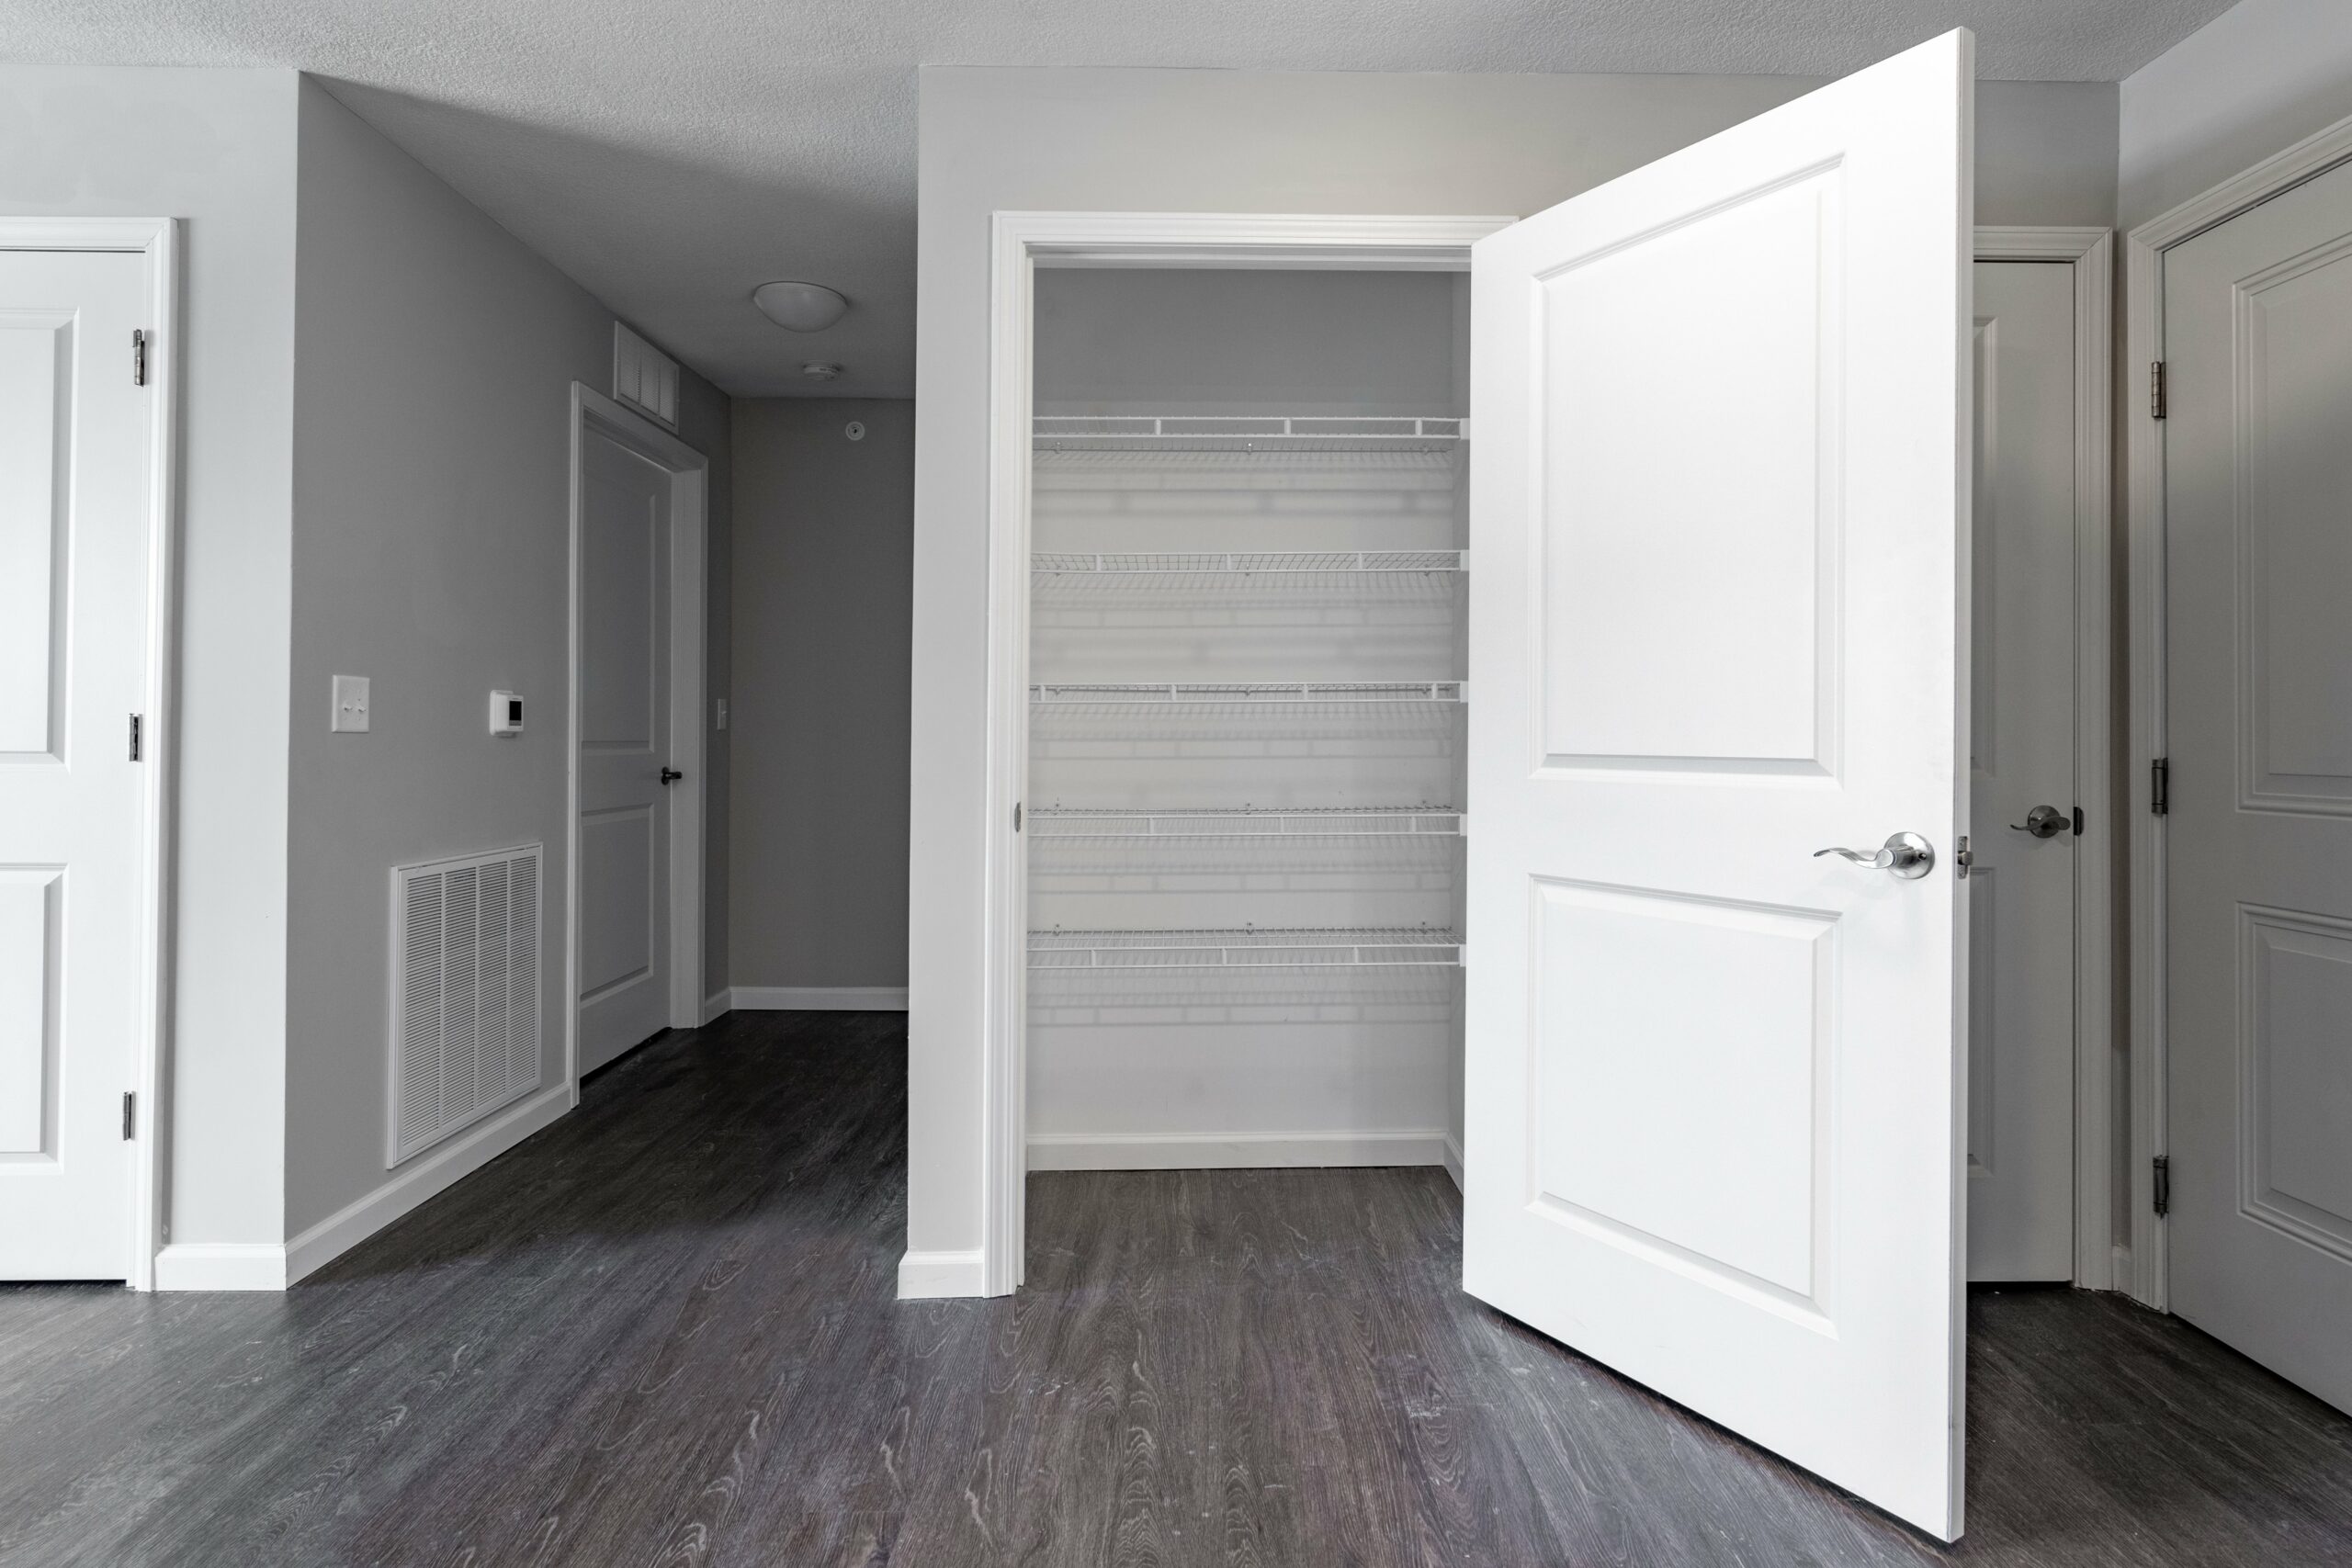 Open-concept main living space with linen closet, hallway, and two doors leading to bedrooms in an Osborn Commons apartment unit